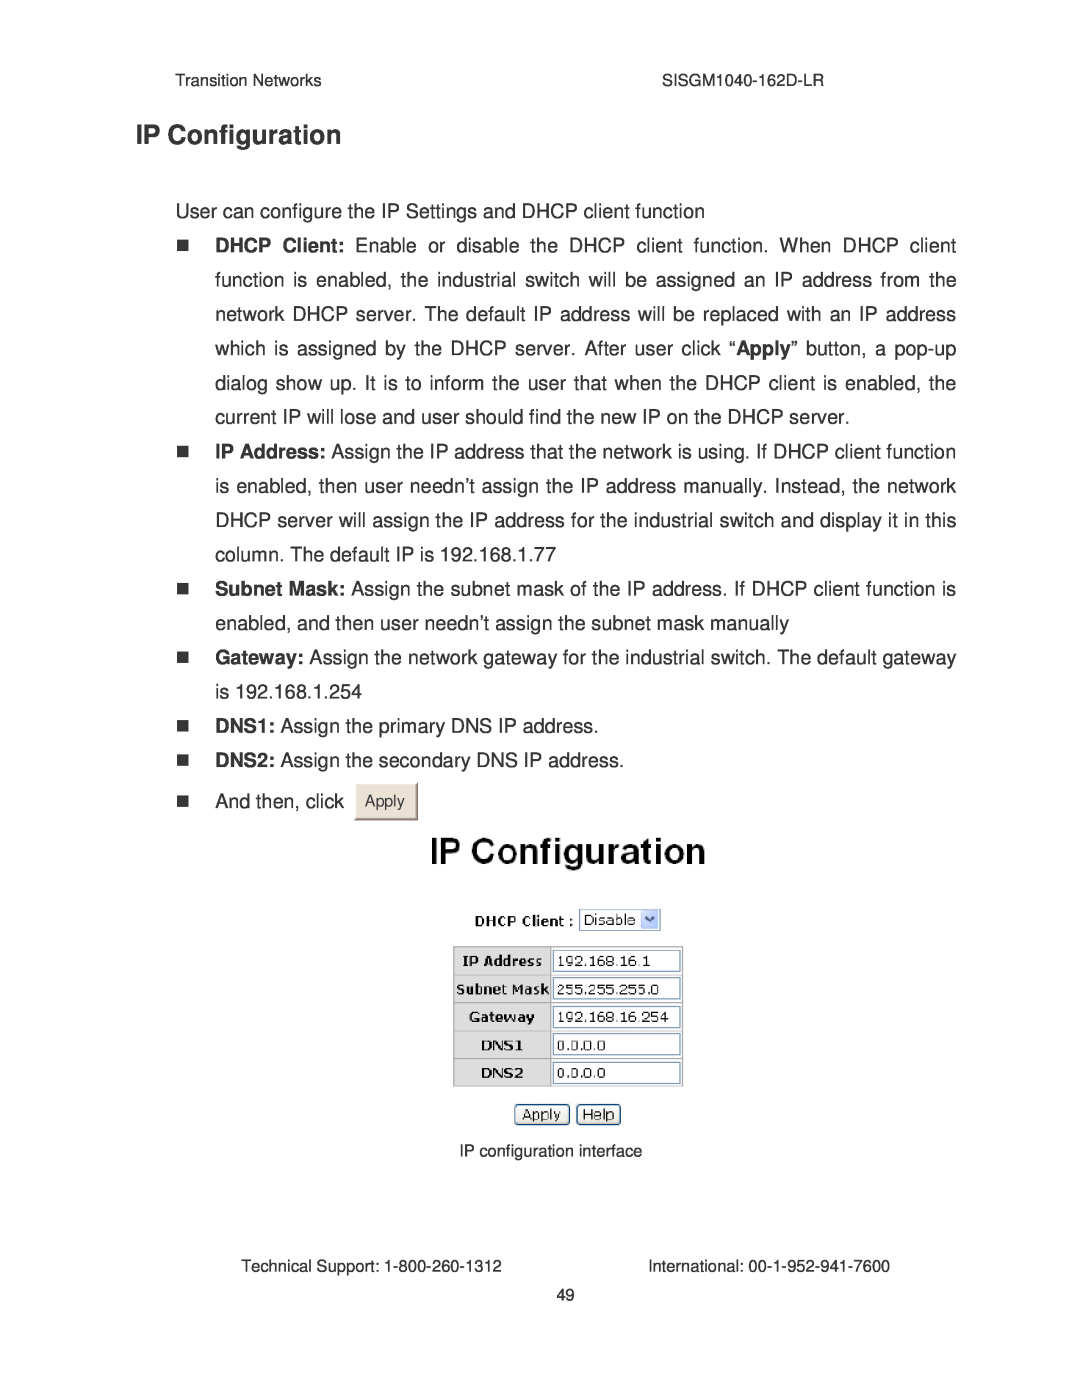 Transition Networks SISGM1040-162D manual IP Configuration 